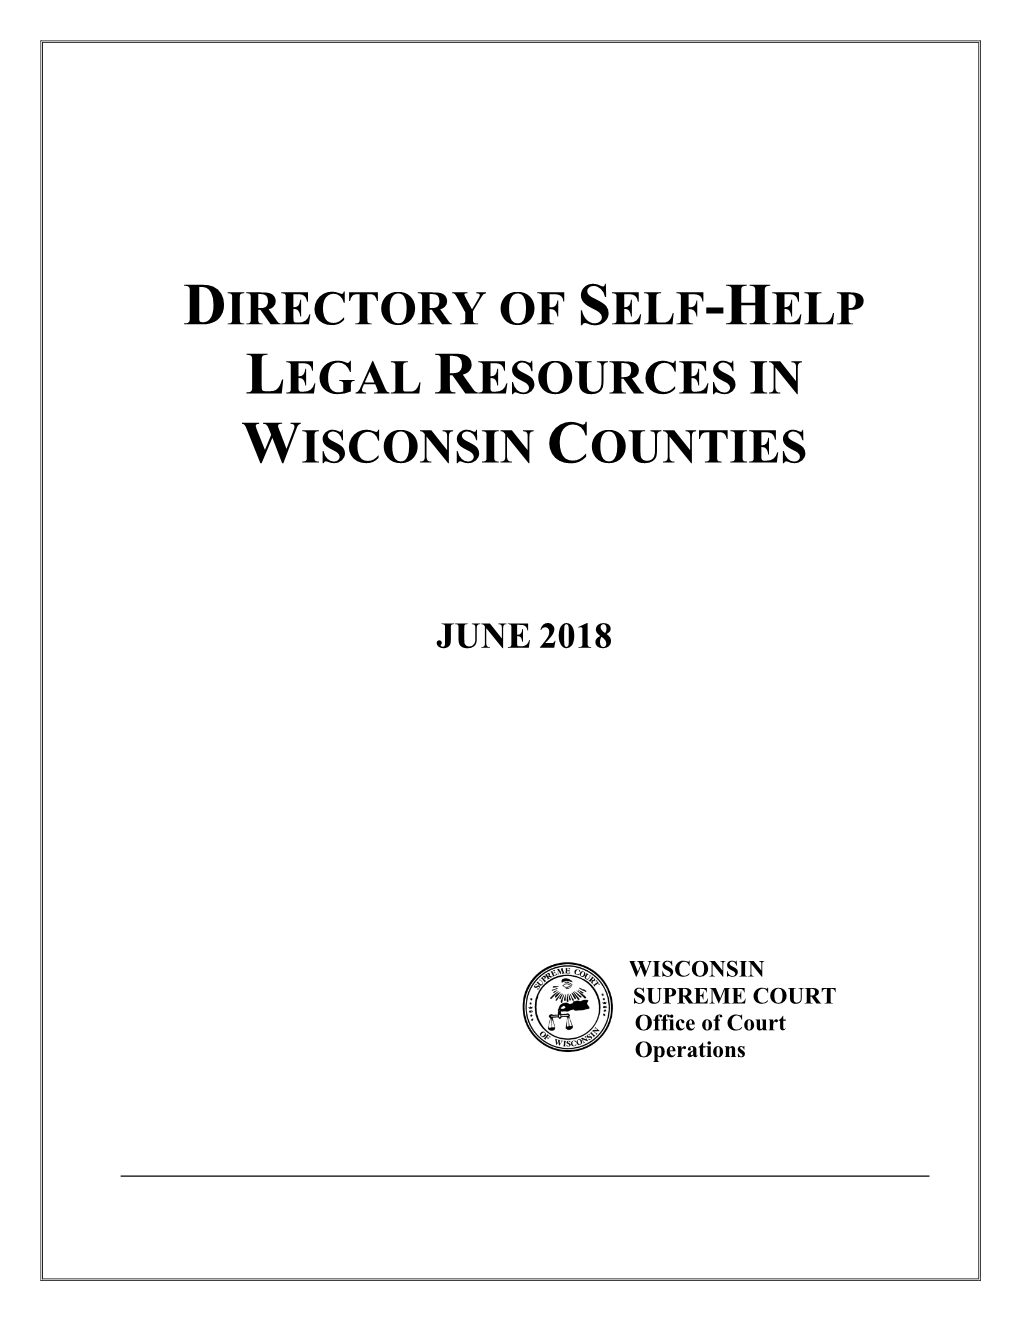 Directory of Self-Help Legal Resources in Wisconsin Counties